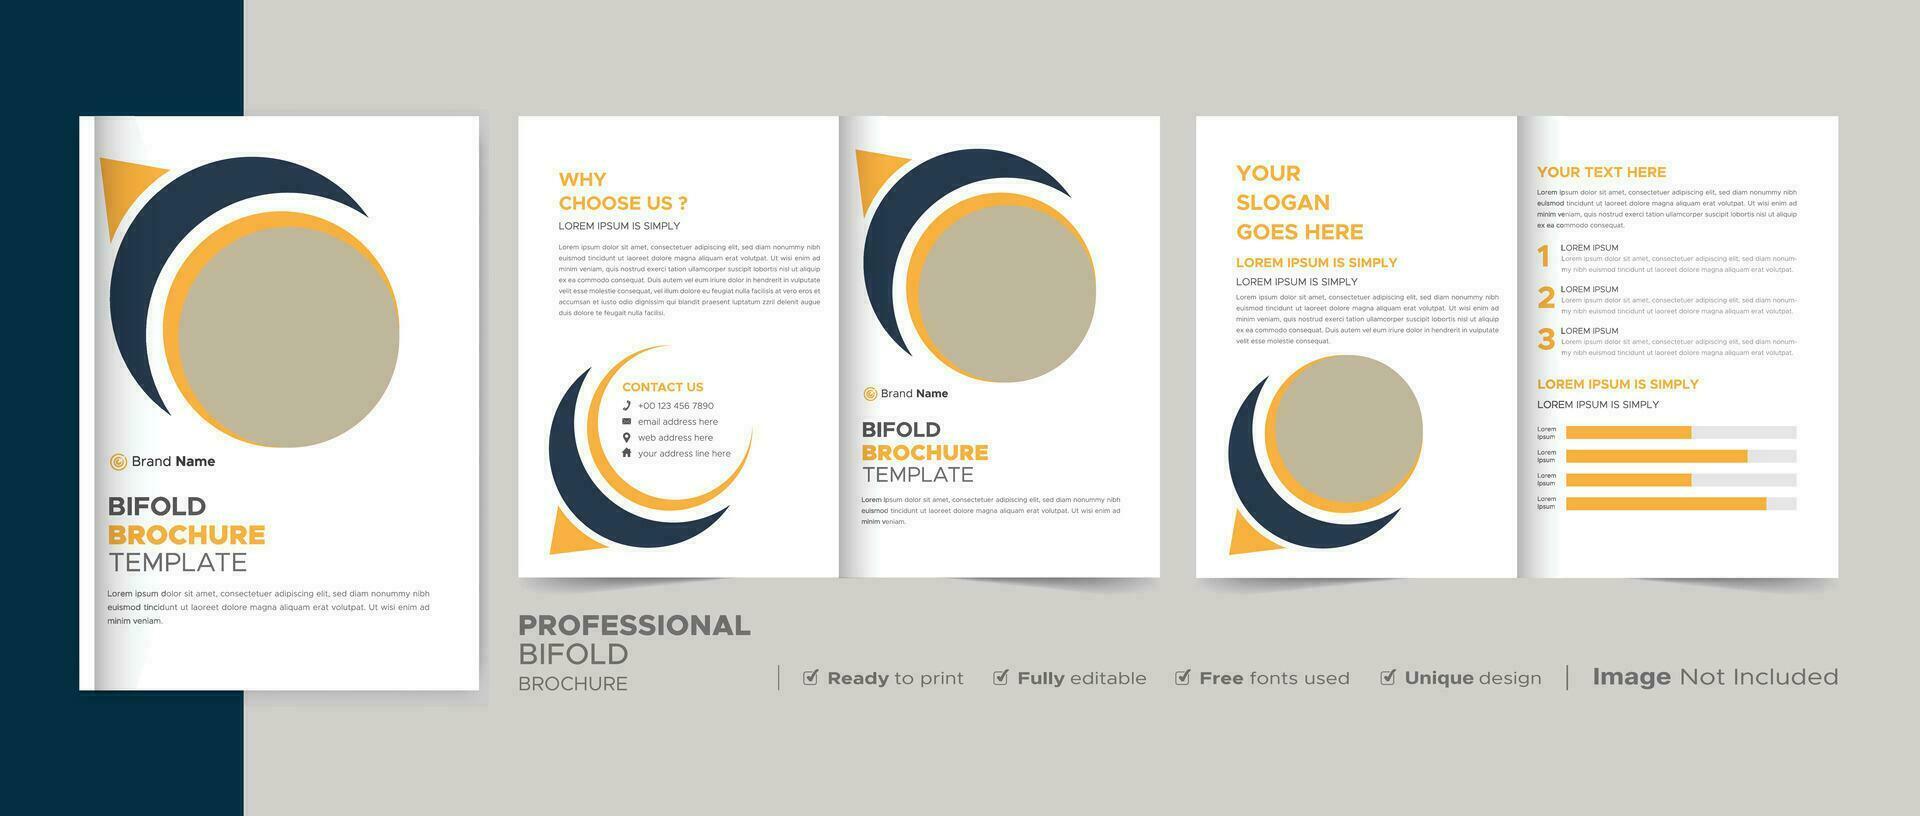 Creative corporate modern business trifold brochure template, trifold layout, letter, a4 size brochure. vector